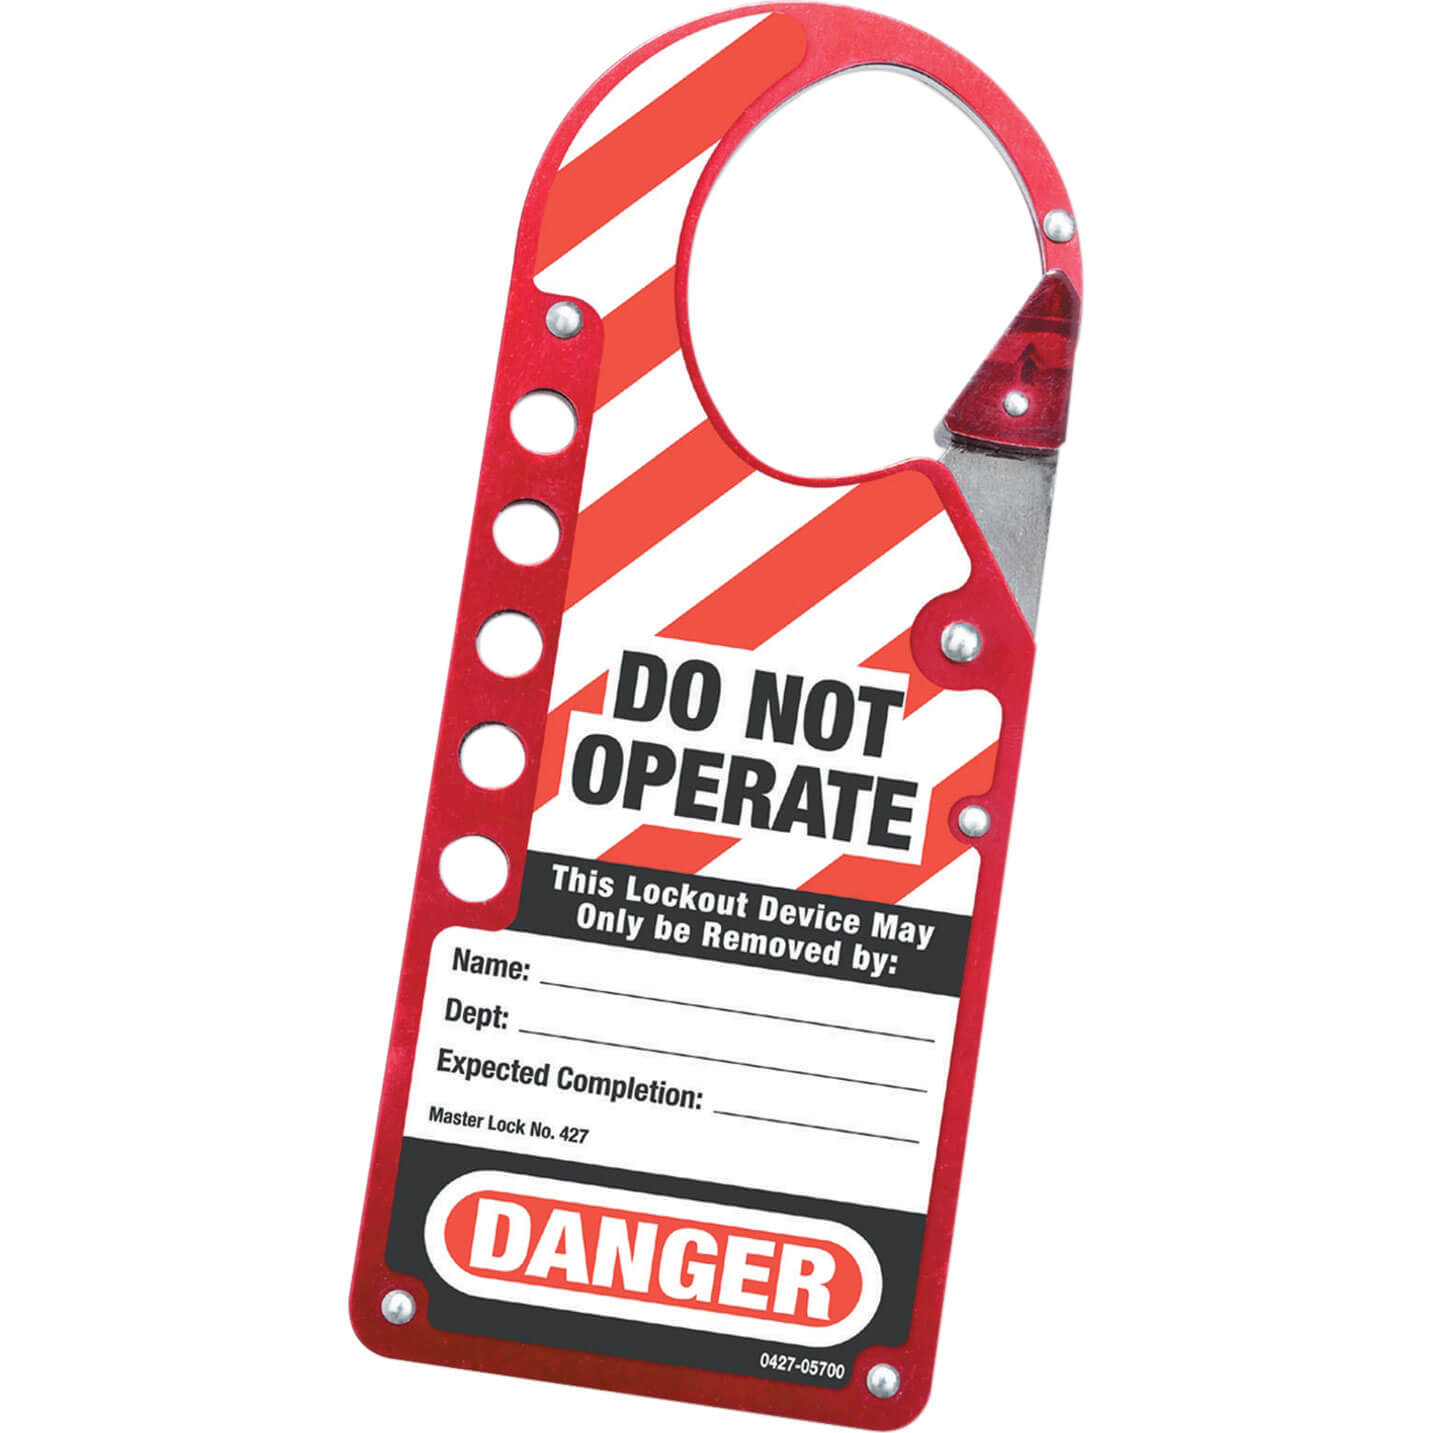 MasterLock Lockout / Tagout Labeled Snap-On Hasp